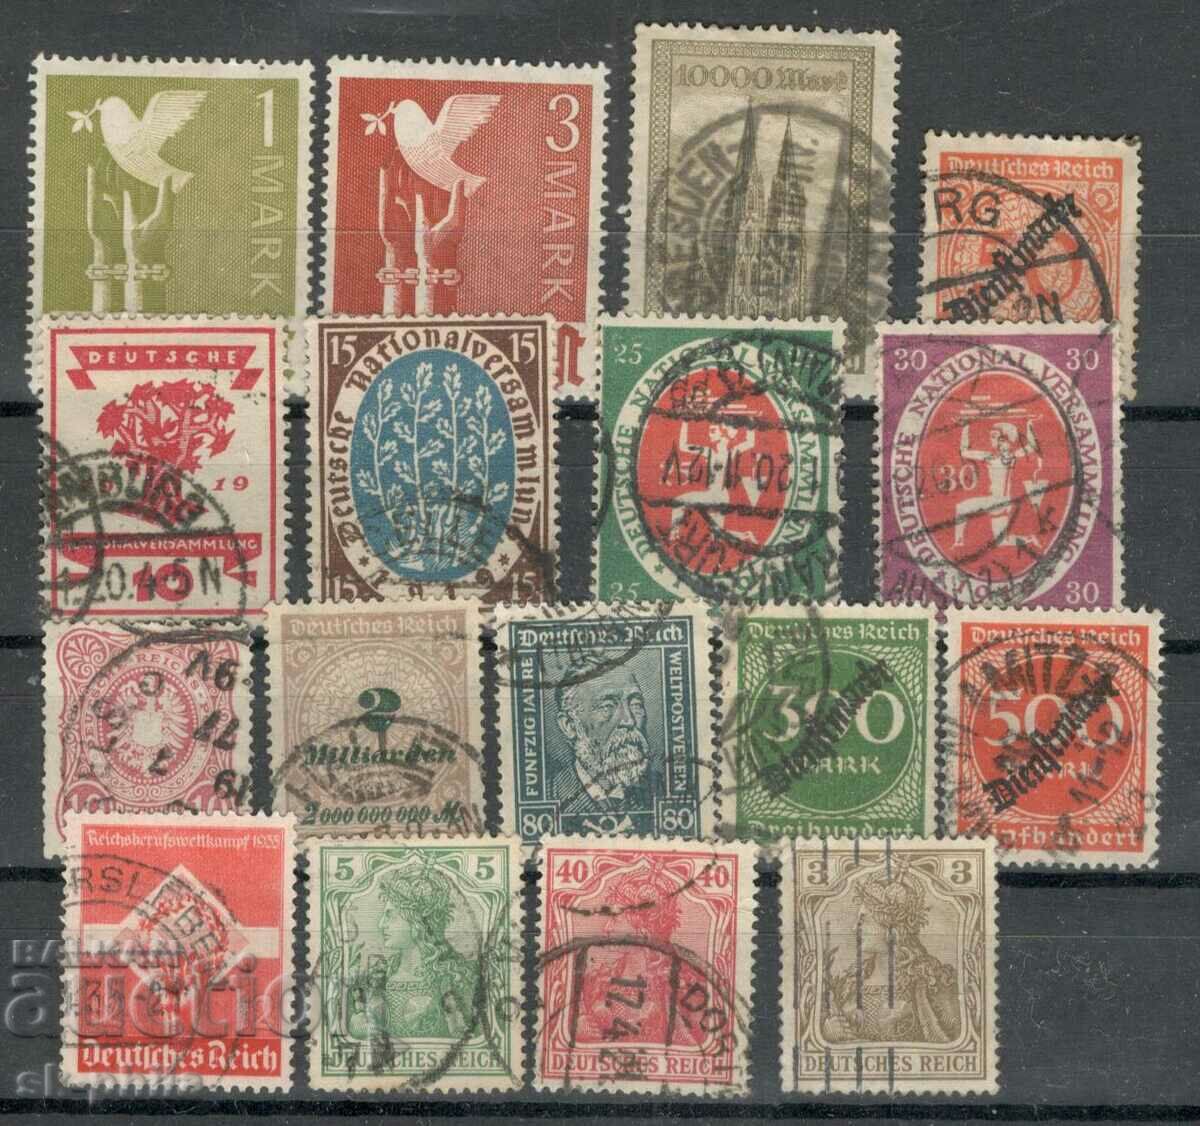 Postage stamps - mix - lot 102, Reich - 17 stamps